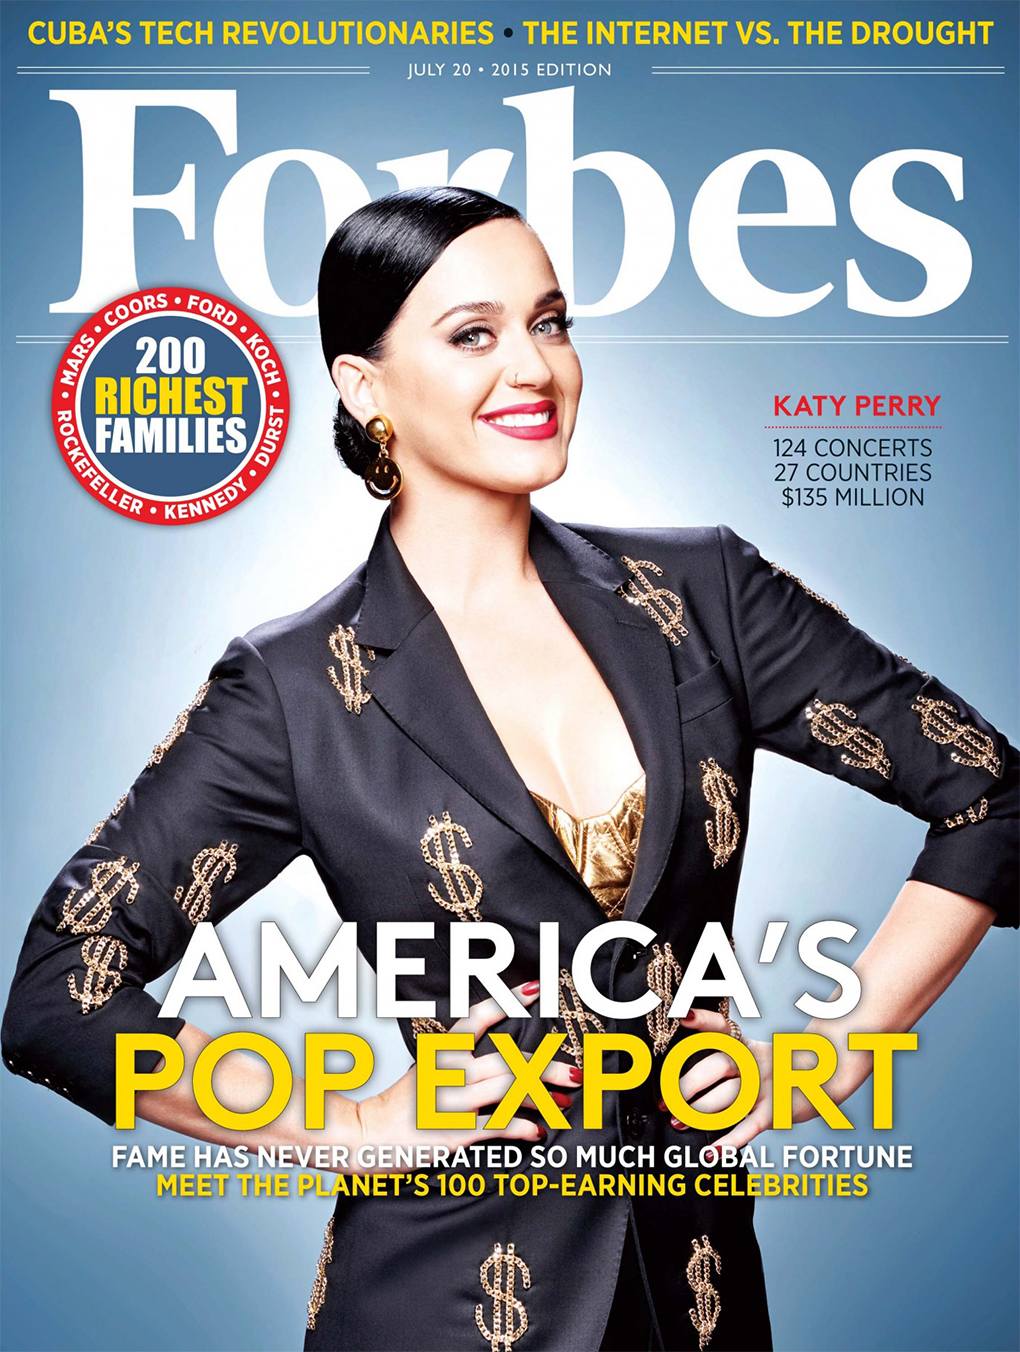 Katy Perry on the cover of Forbes magazine